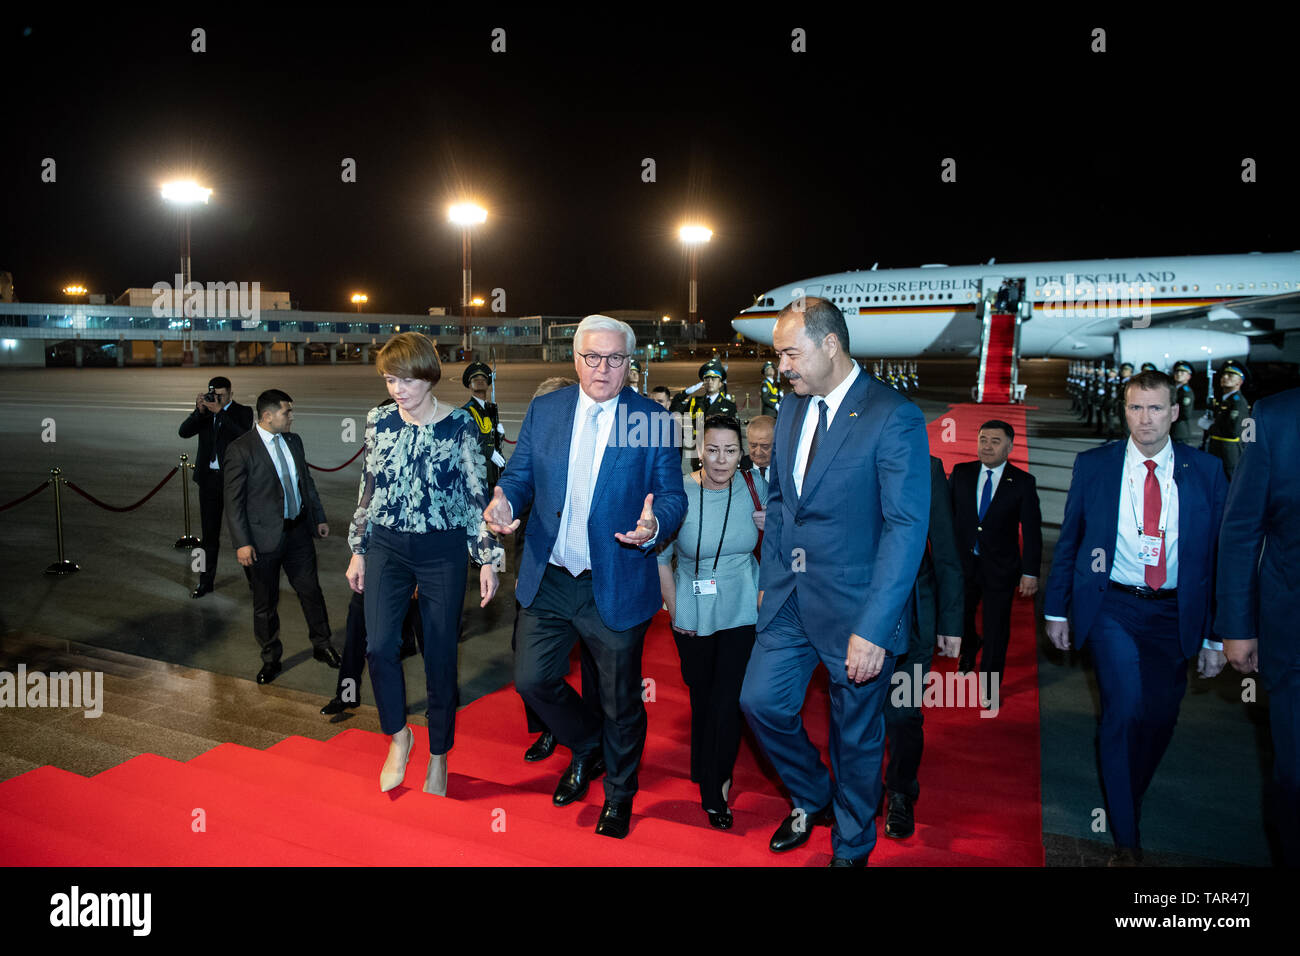 Taschkent, Uzbekistan. 27th May, 2019. President Frank-Walter Steinmeier (in front M) and his wife Elke Büdenbender arrive at Yushny International Tashkent Airport and are welcomed by Abdulla Aripow (r), Prime Minister of Uzbekistan. President Steinmeier and his wife are on a two-day state visit to Uzbekistan. They are accompanied by numerous business representatives and cultural workers. Credit: Bernd von Jutrczenka/dpa/Alamy Live News Stock Photo